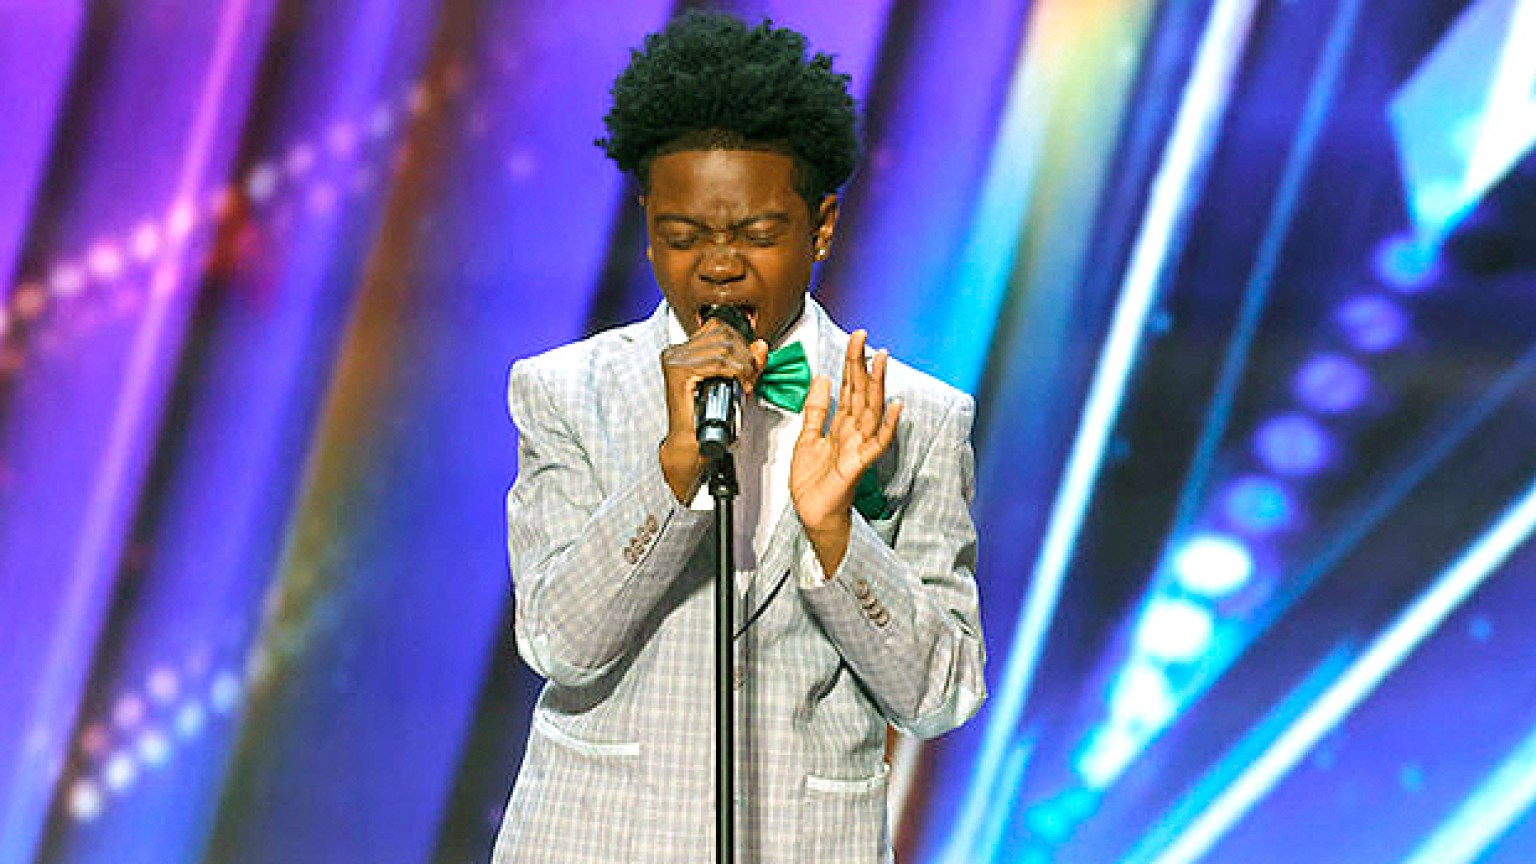 Who Is D’Corey Johnson? About The 11YearOld Singer On ‘AGT